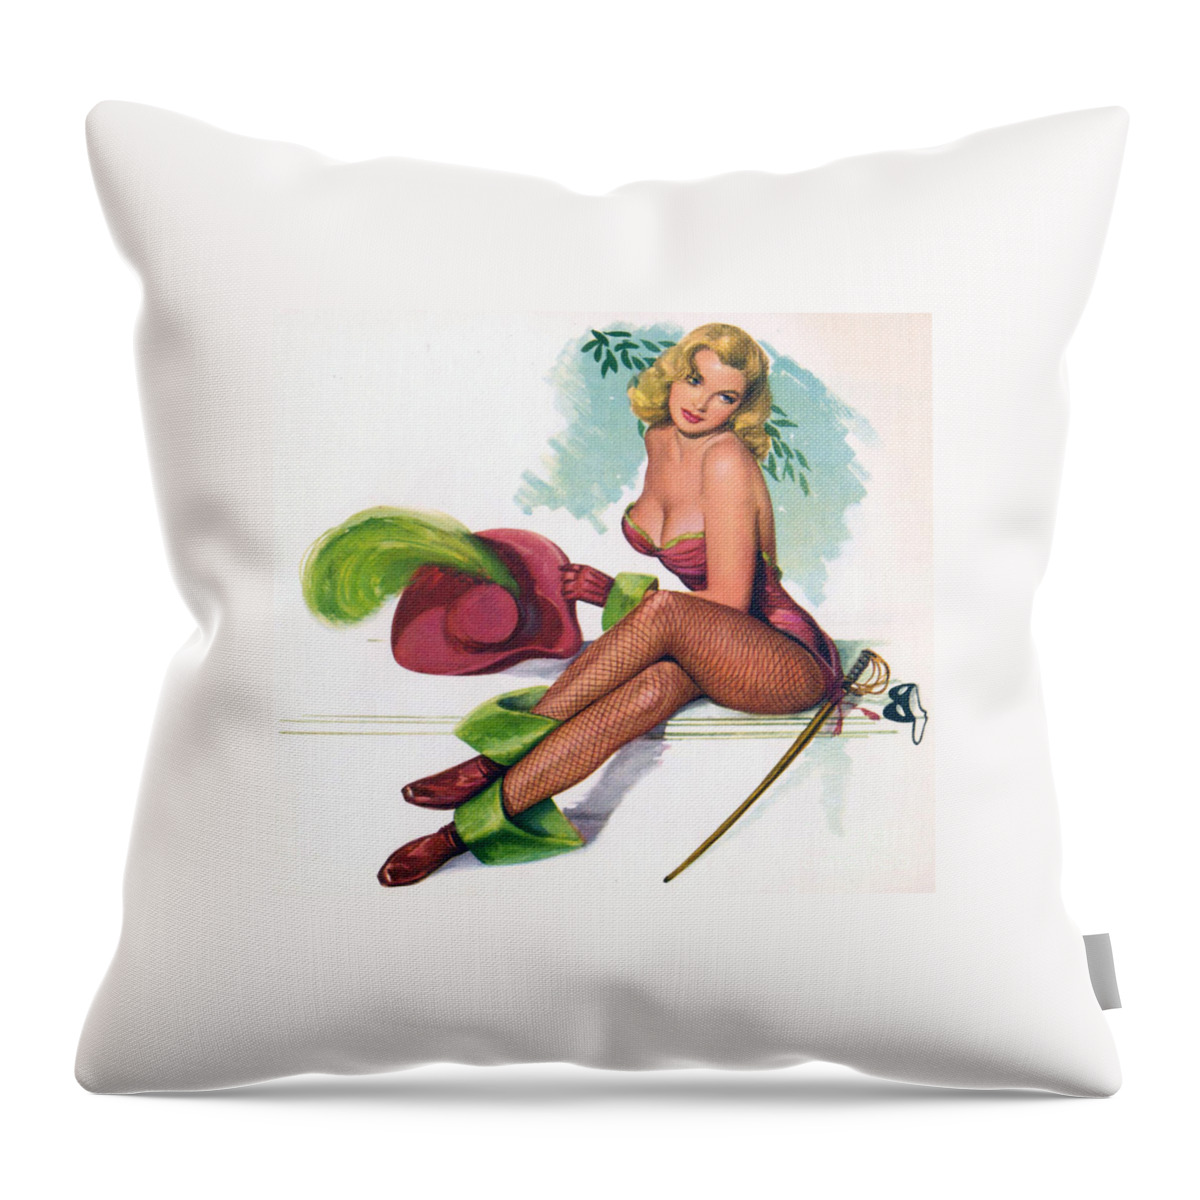 Vintage Throw Pillow featuring the photograph 1950's Vintage Pin Up Girl by Action